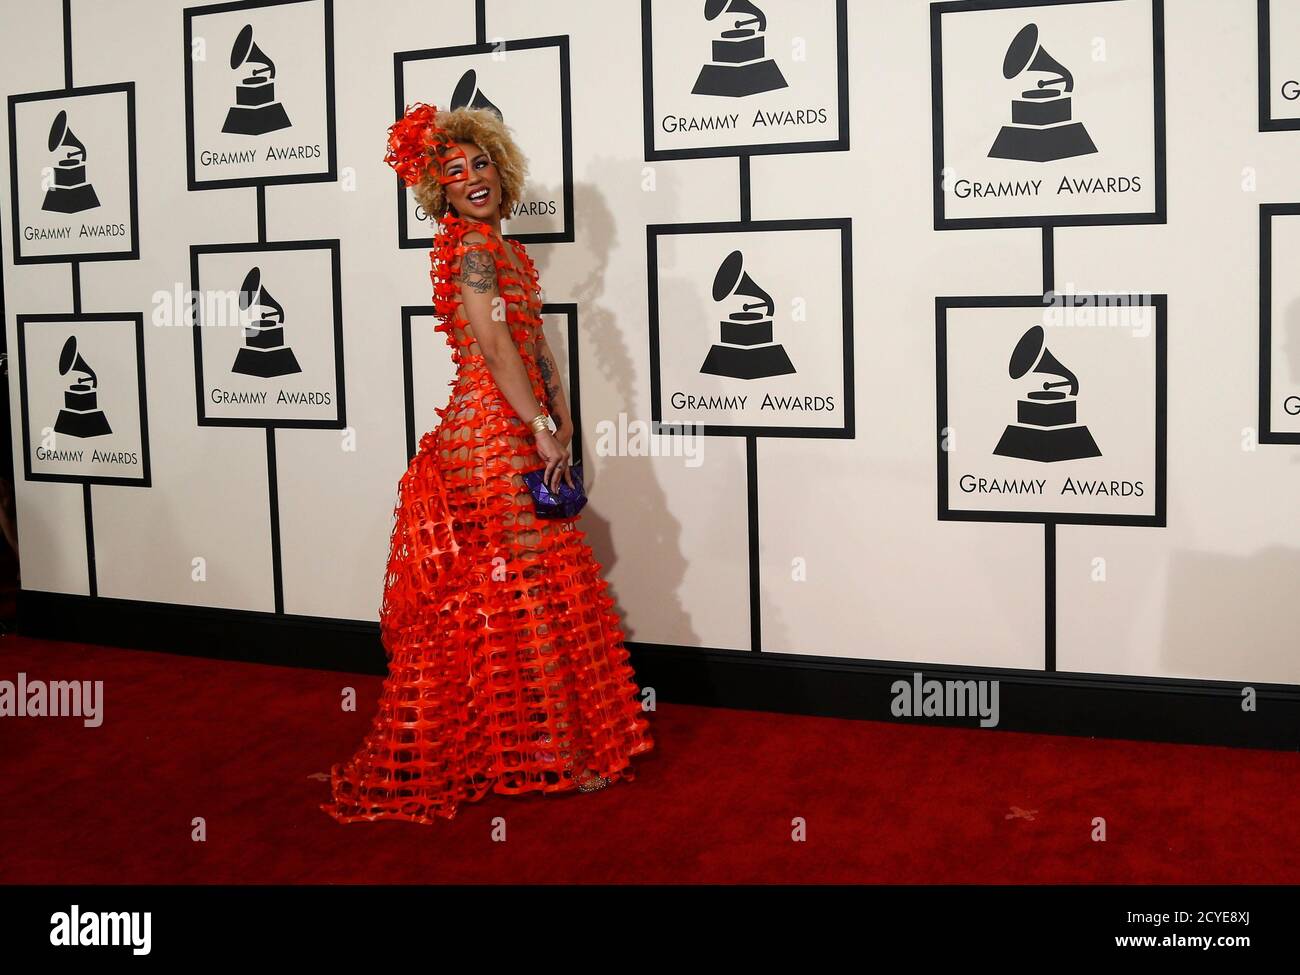 Singer Joy Villa arrives at the 57th annual Grammy Awards in Los Angeles,  California February 8, 2015. REUTERS/Mario Anzuoni (UNITED STATES - Tags:  ENTERTAINMENT) (GRAMMYS-ARRIVALS Stock Photo - Alamy